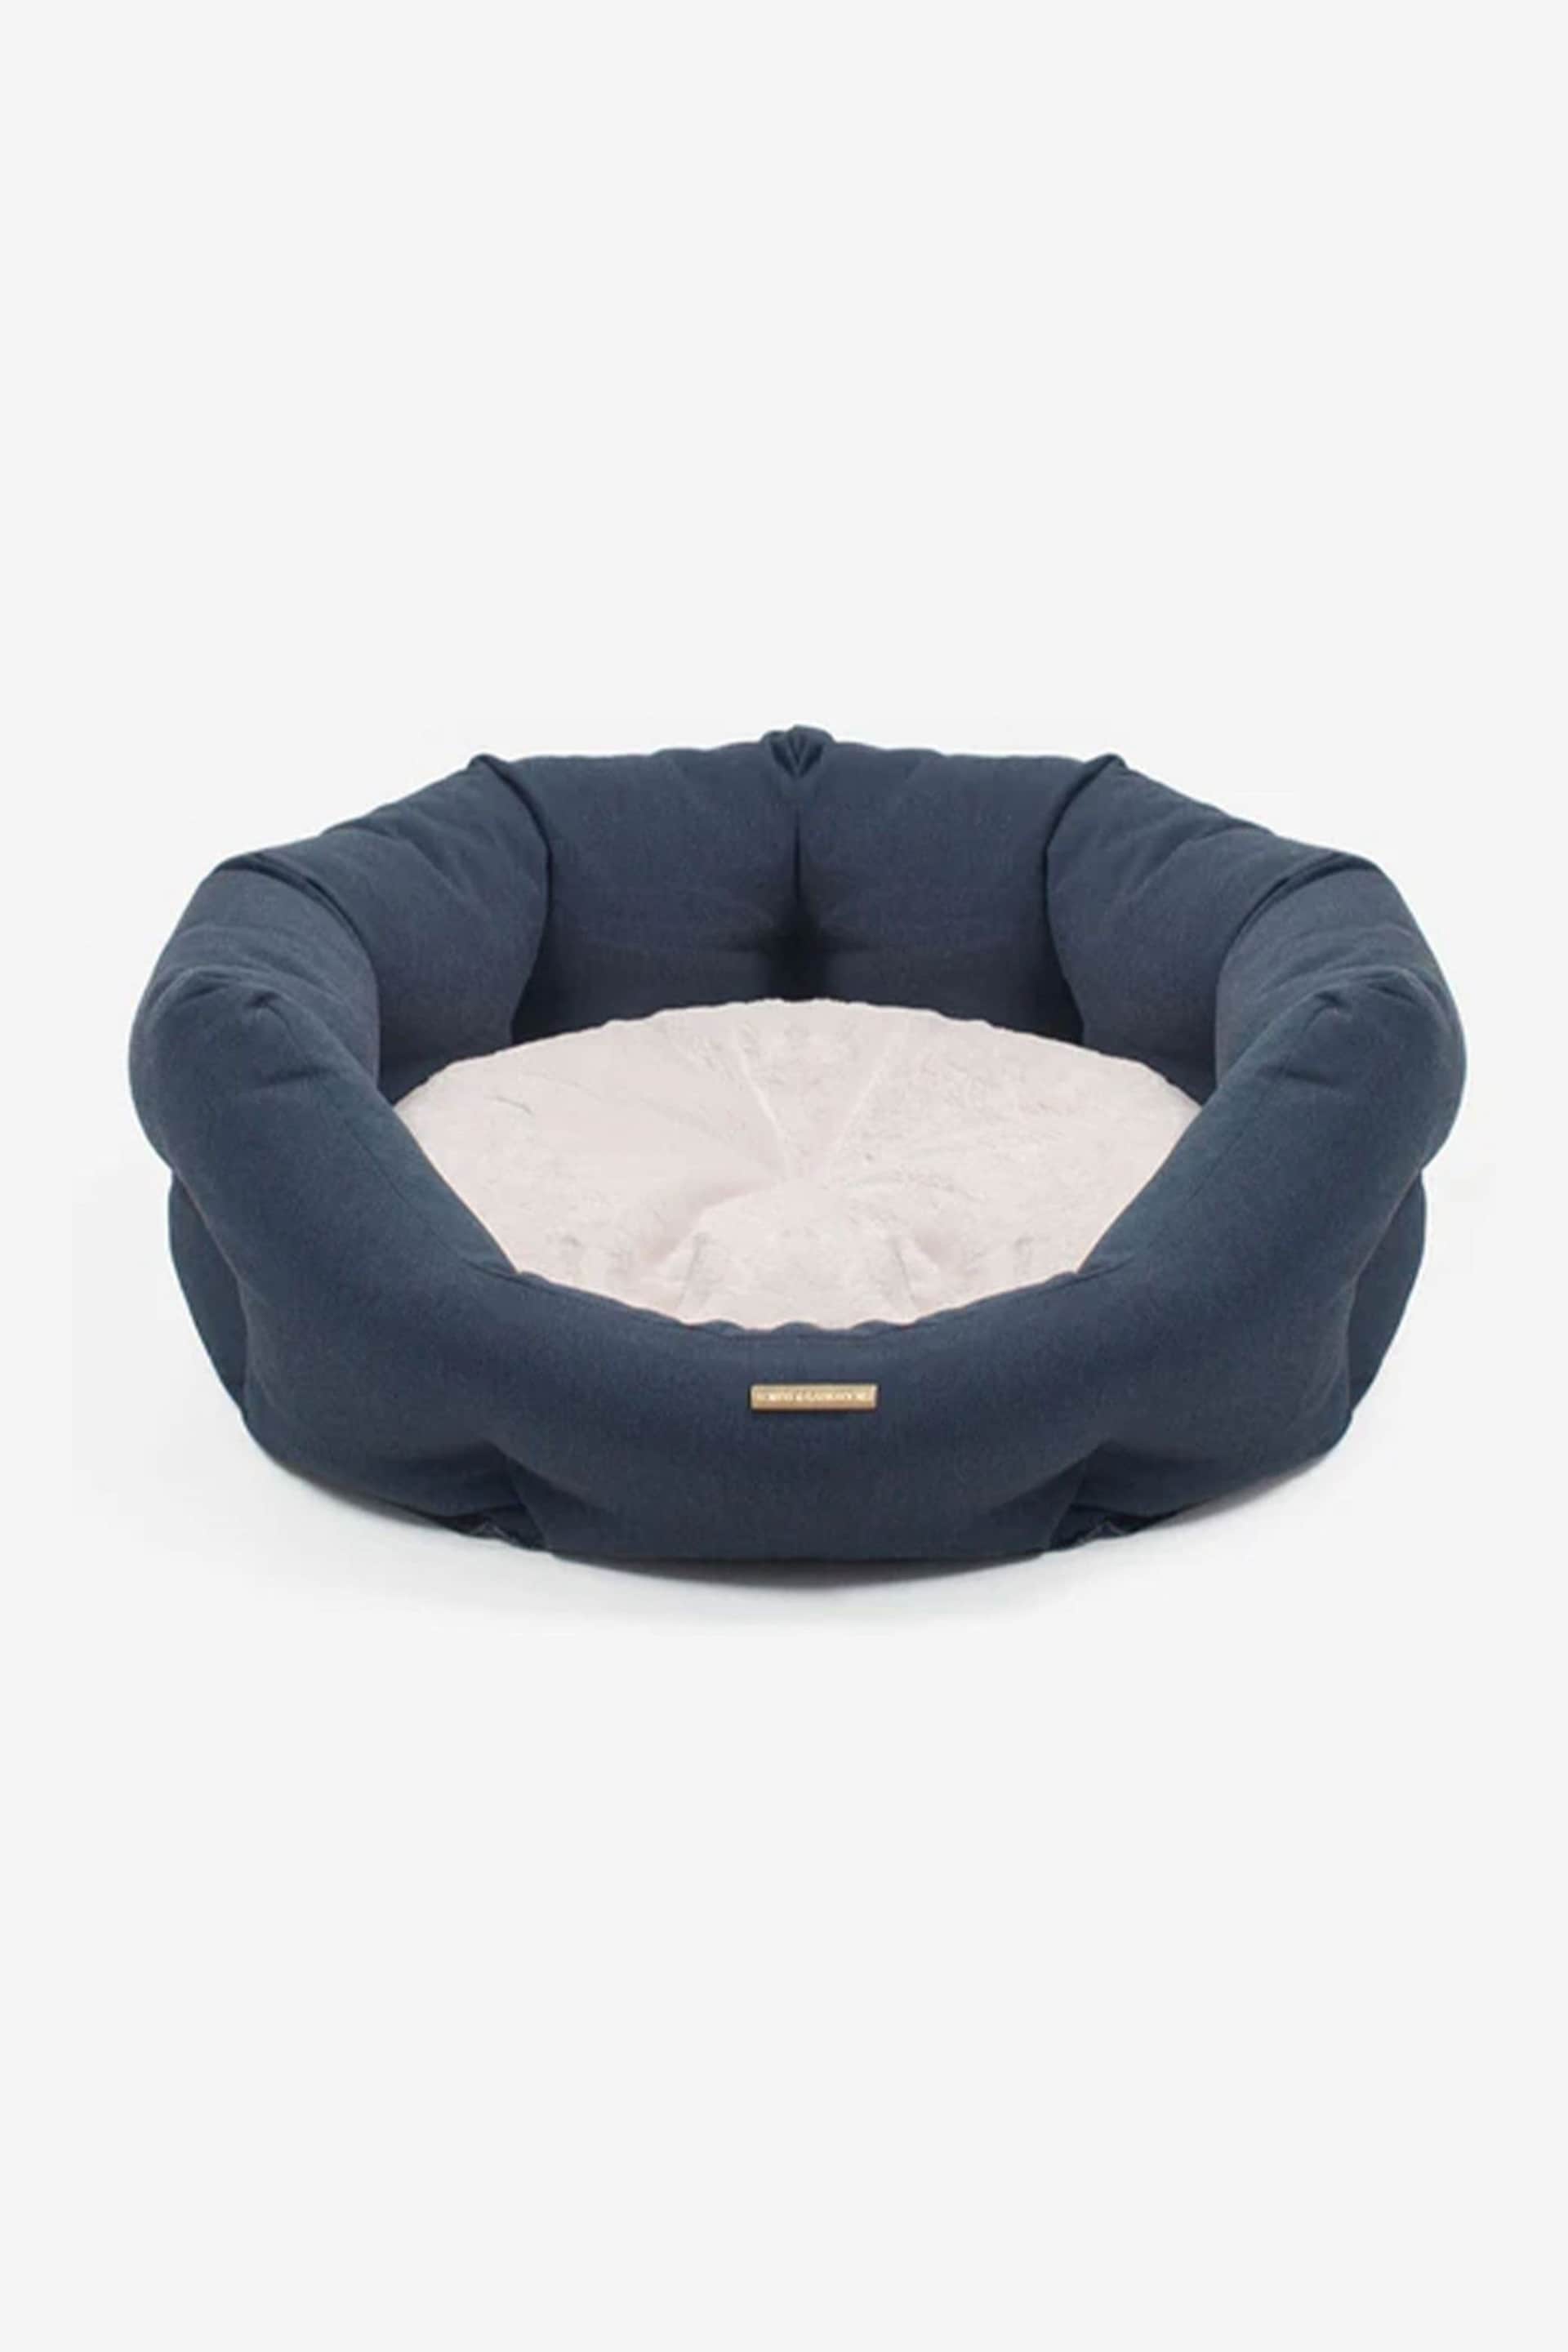 Lords and Labradors Blue Essentials Twill Oval Dog Bed - Image 4 of 5